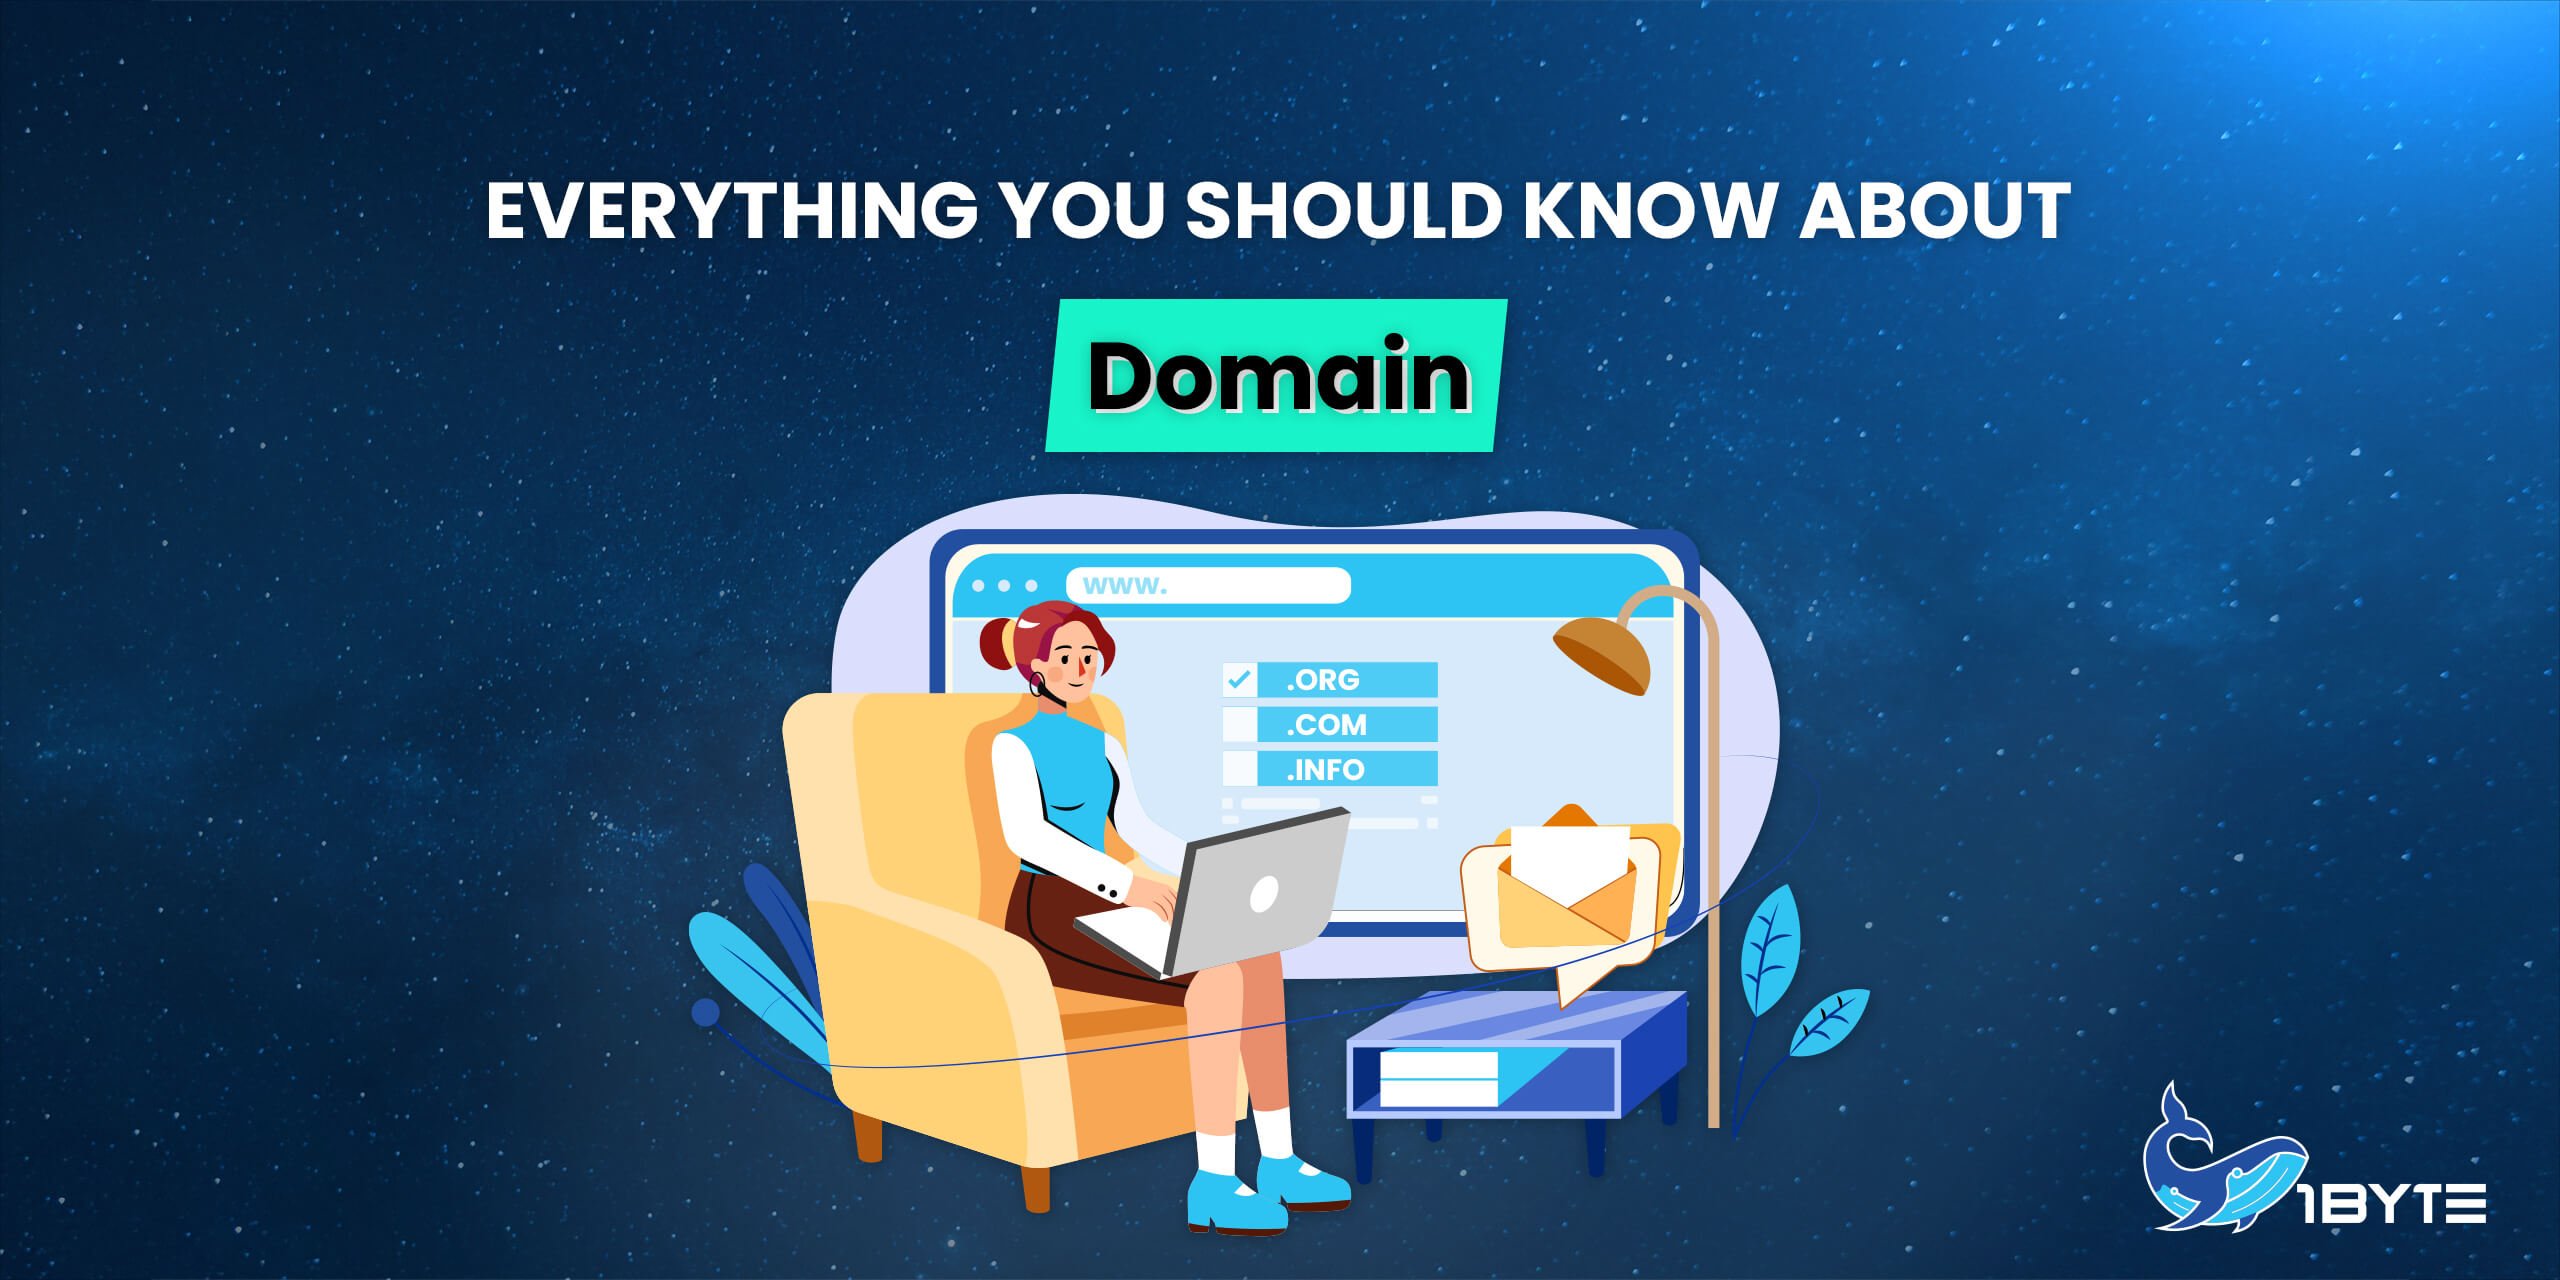 Everything you should know about Domain